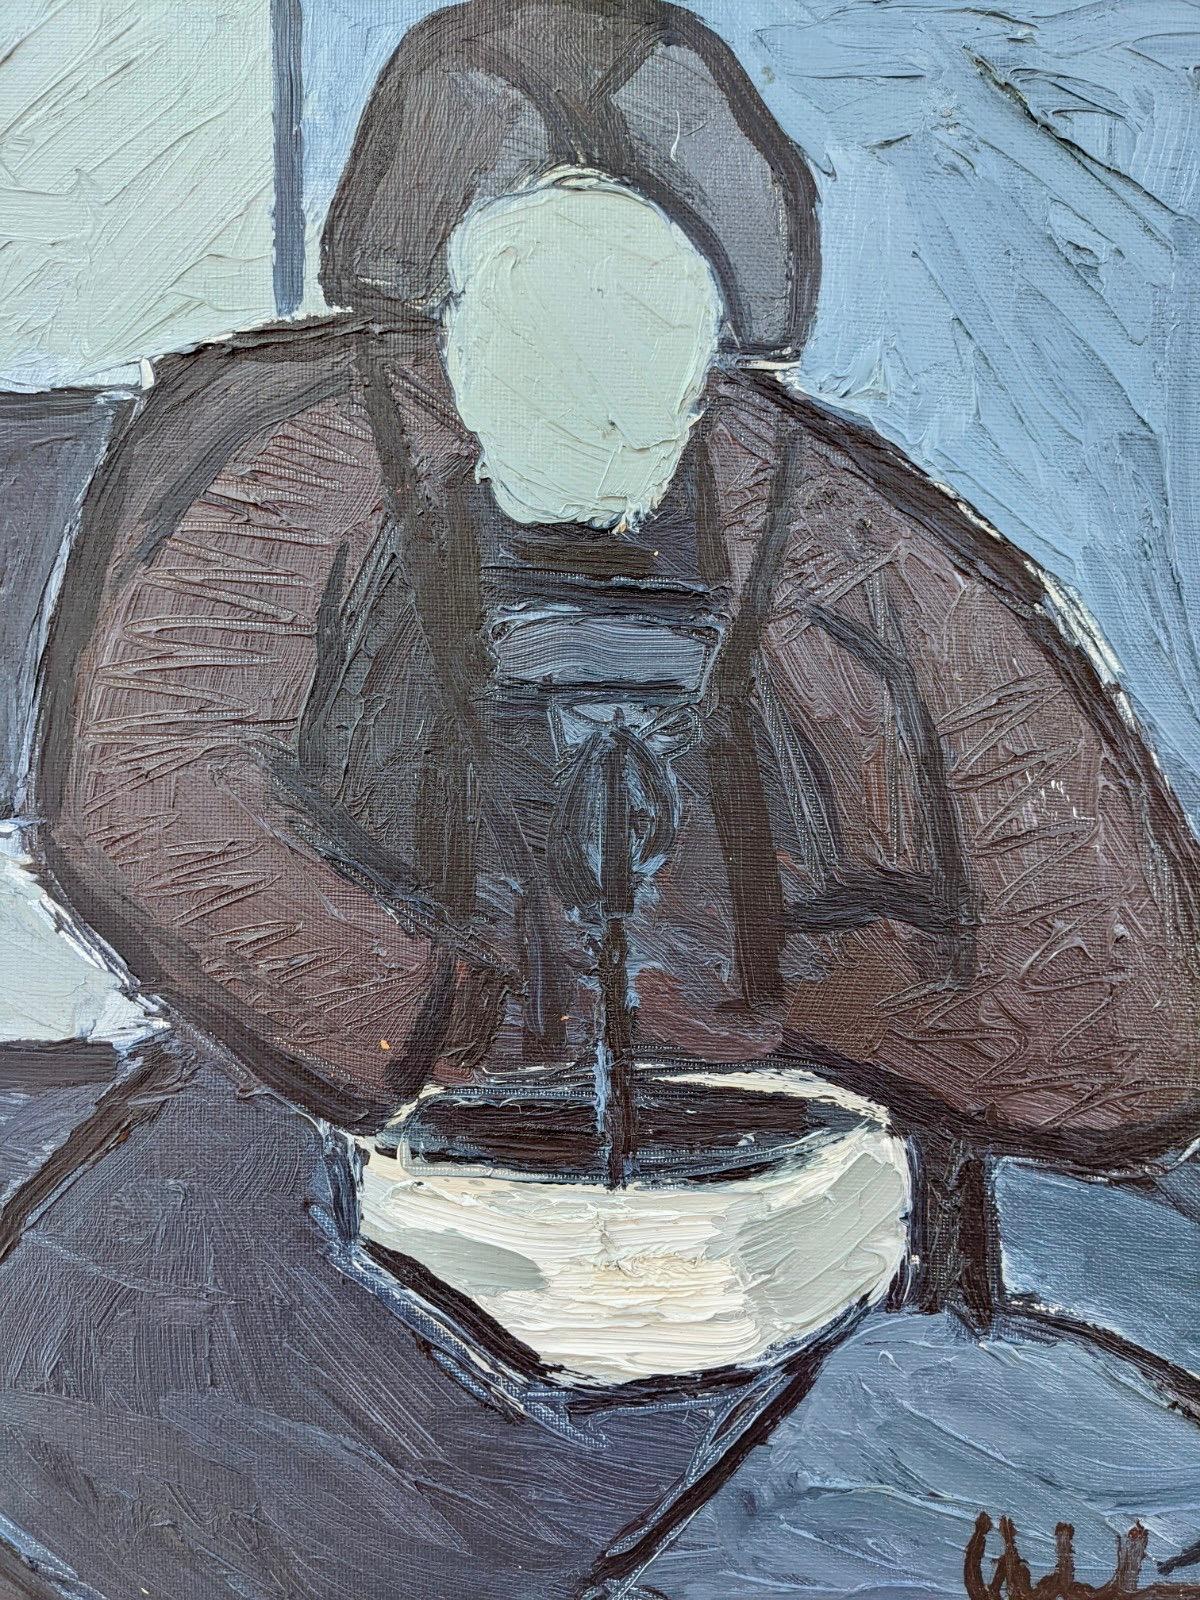 LADY WITH BOWL
Size: 48 x 40 cm (including frame)
Oil on Canvas

A well-executed and impactful mid 20th century semi-abstract blue oil portrait, depicting a lady seated cross-legged and holding a white bowl.

The style of the painting is typically